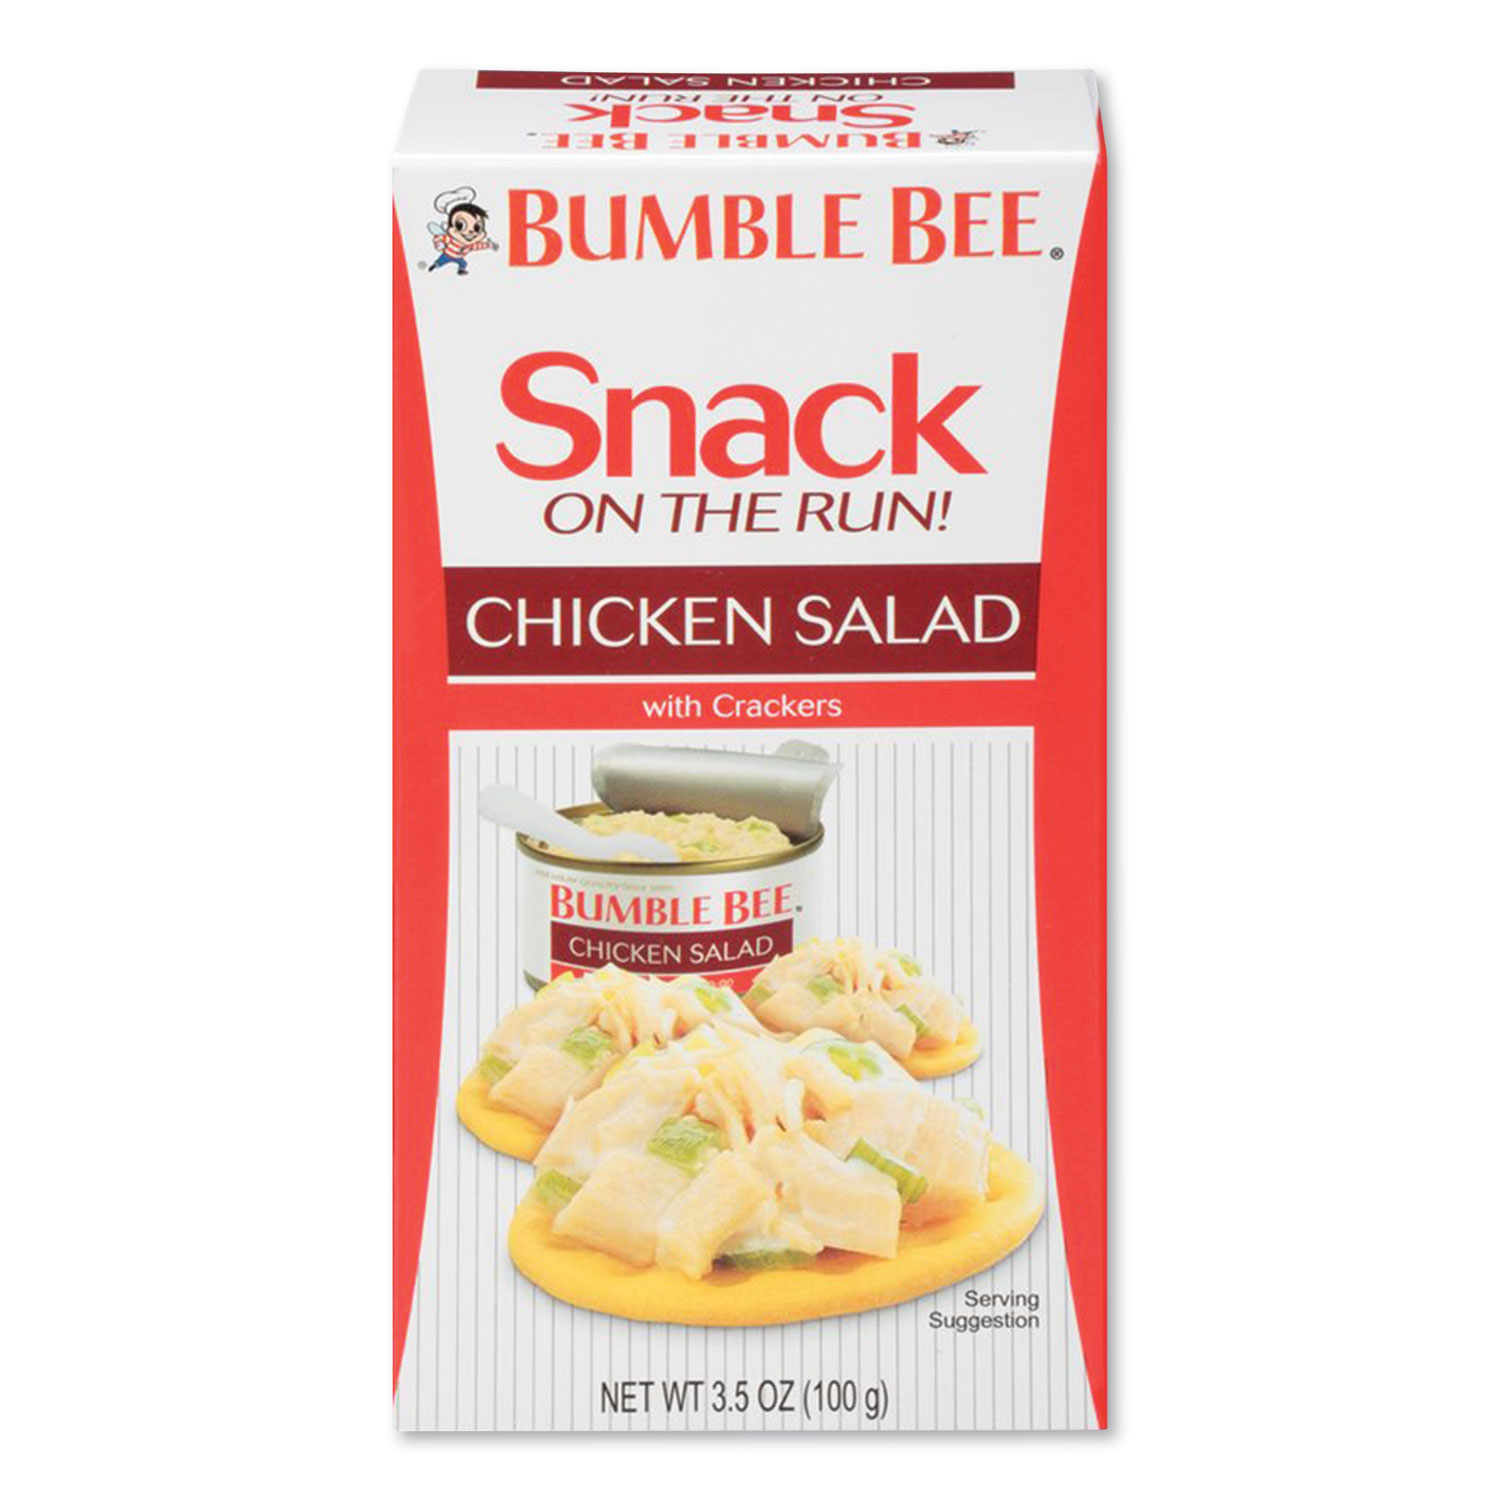  Bumble Bee AHF70350 Snack on the Run Chicken Salad with Crackers, 3.5 oz Pack, 12/Carton (BBY684686) 